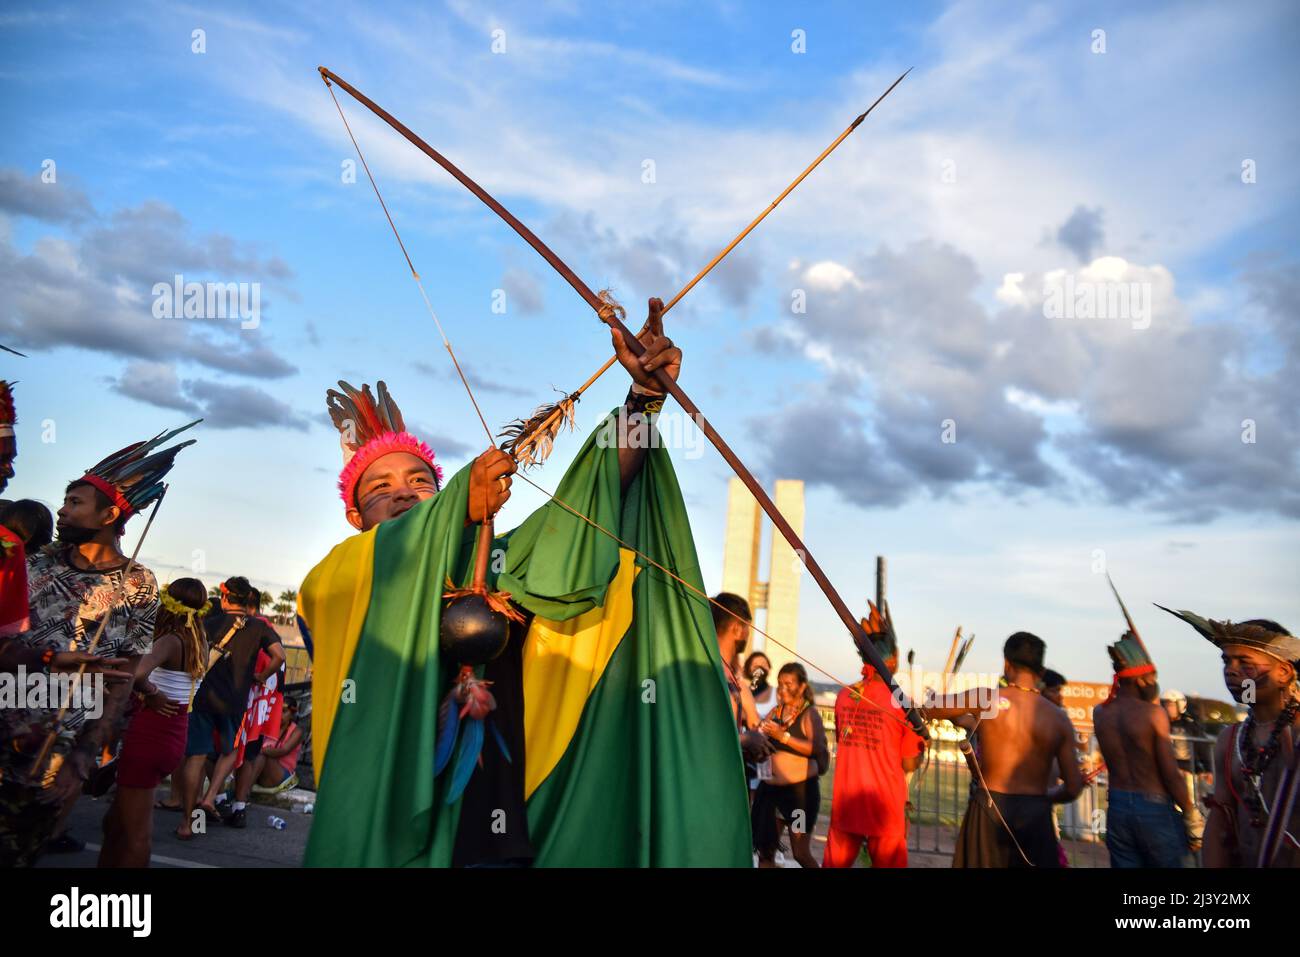 Indigenous people march against the government and demanding their constitutional rights in Brasília, Brazil, on April 9, 2022. The march is an event part of the Free Land Camp (ATL), which happens annually in the capital of Brazil. Several ethnic groups are encamped in Brasília for the 18th encampment. (Photo by Antonio Molina/Fotoarena/Sipa USA) Stock Photo